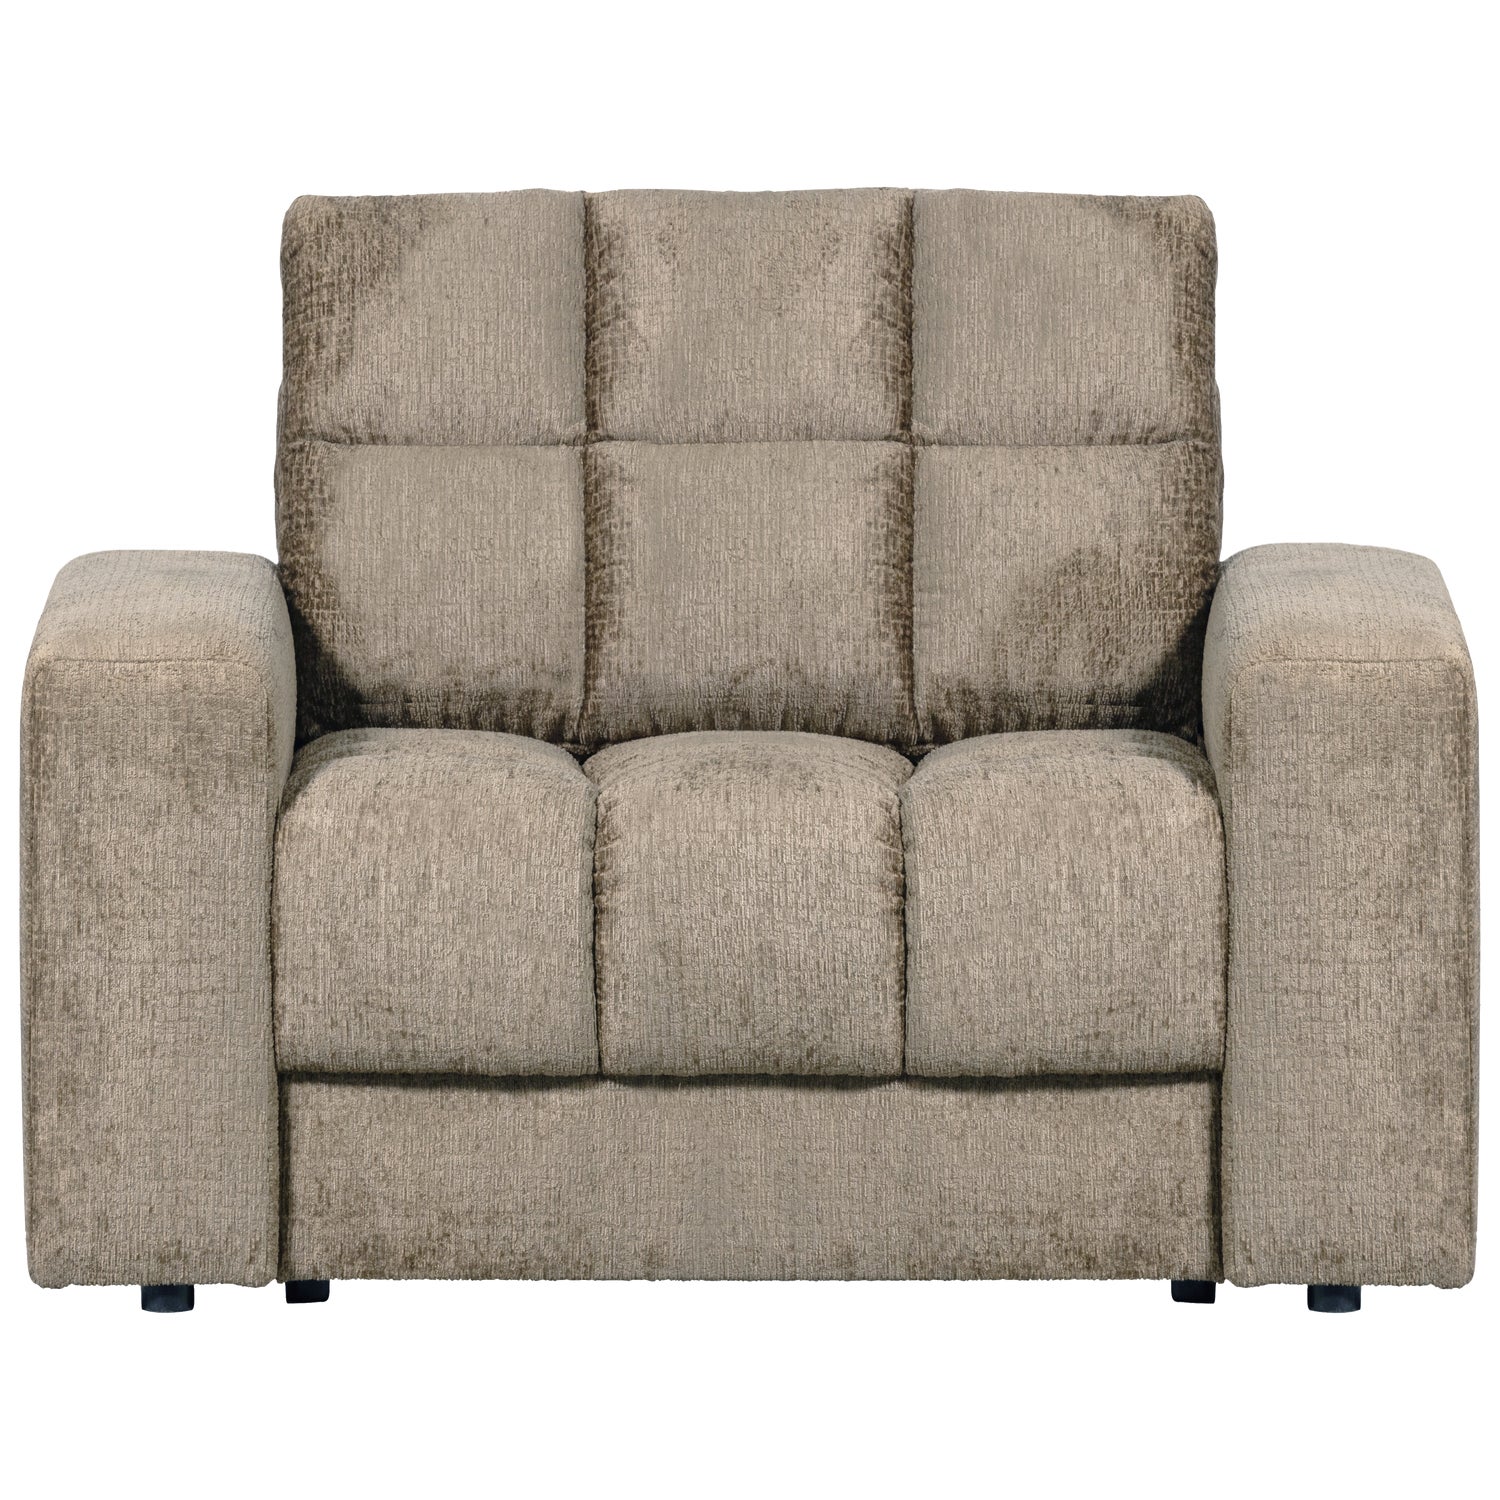 379003-WH-01_VS_WE_Second_date_fauteuil_structure_velvet_wheatfield.png?auto=webp&format=png&width=1500&height=1500